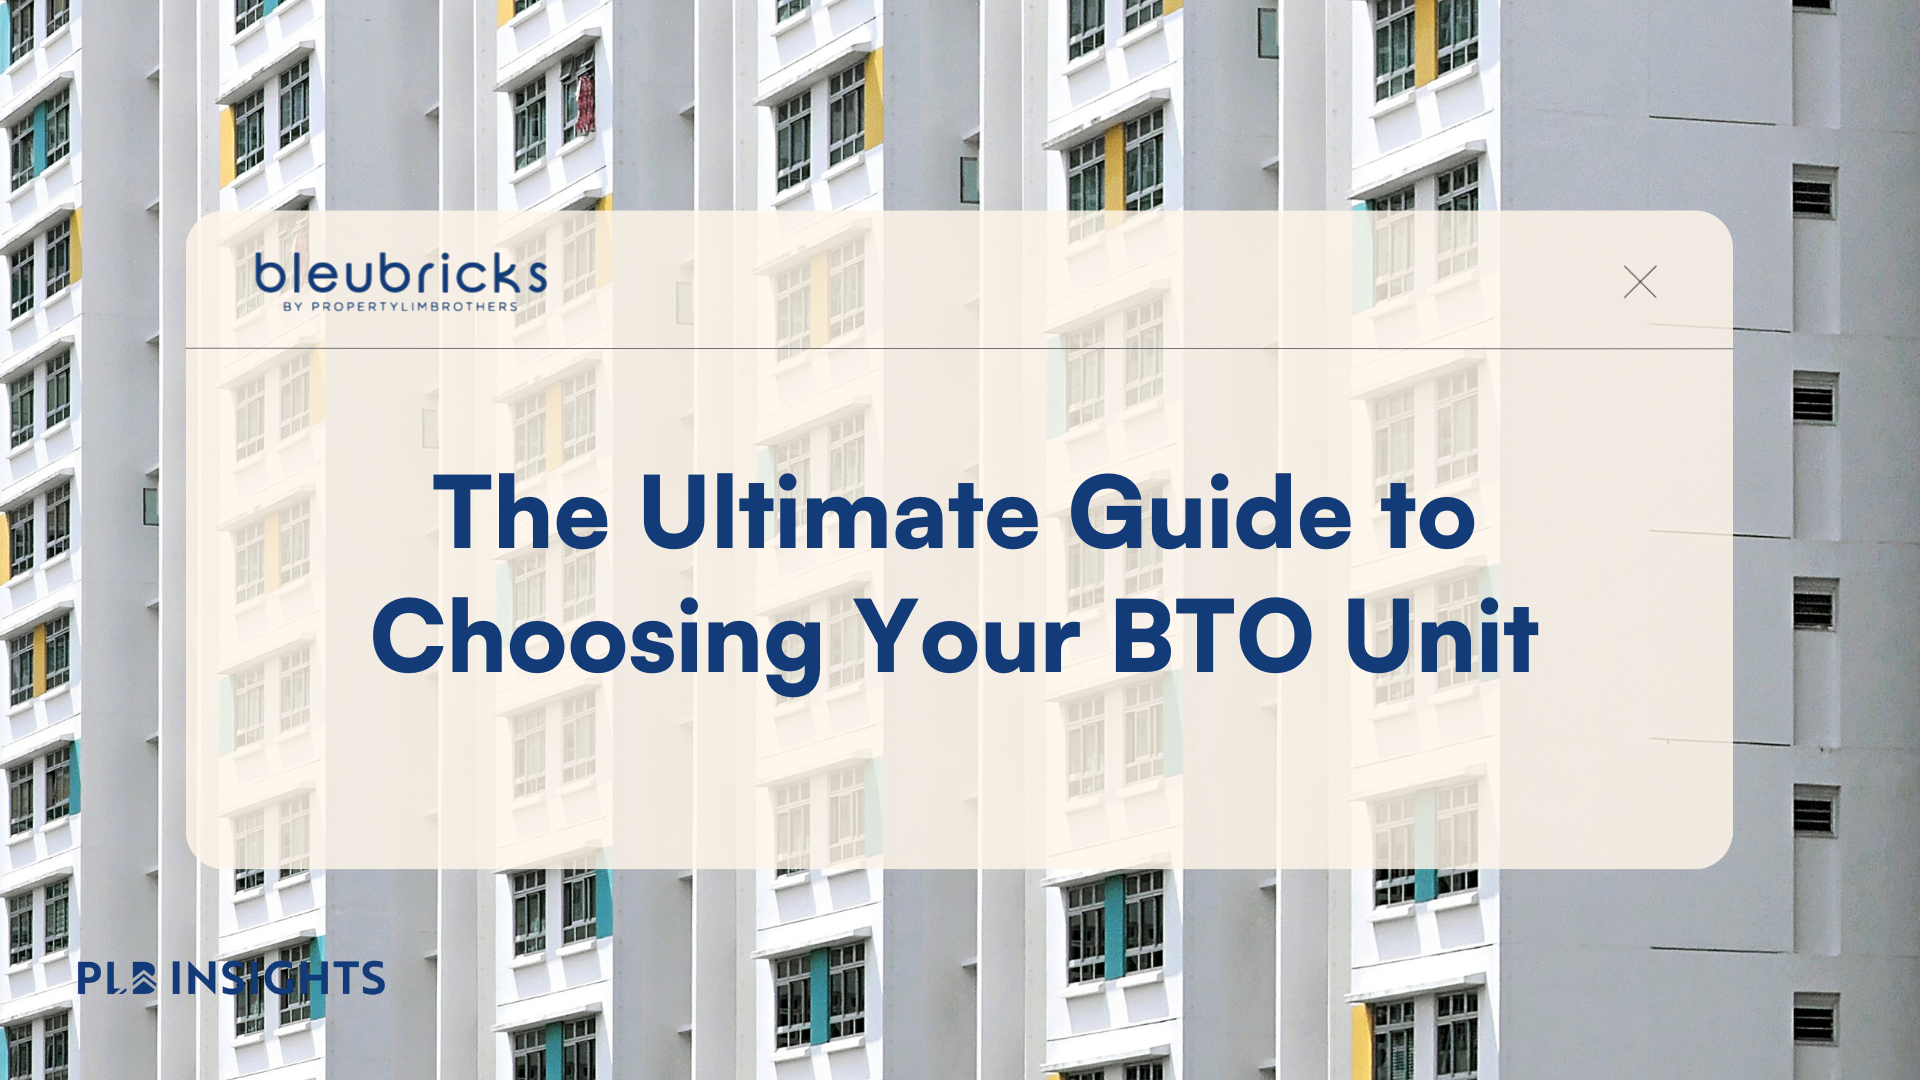 The Ultimate Guide to Choosing Your BTO Unit